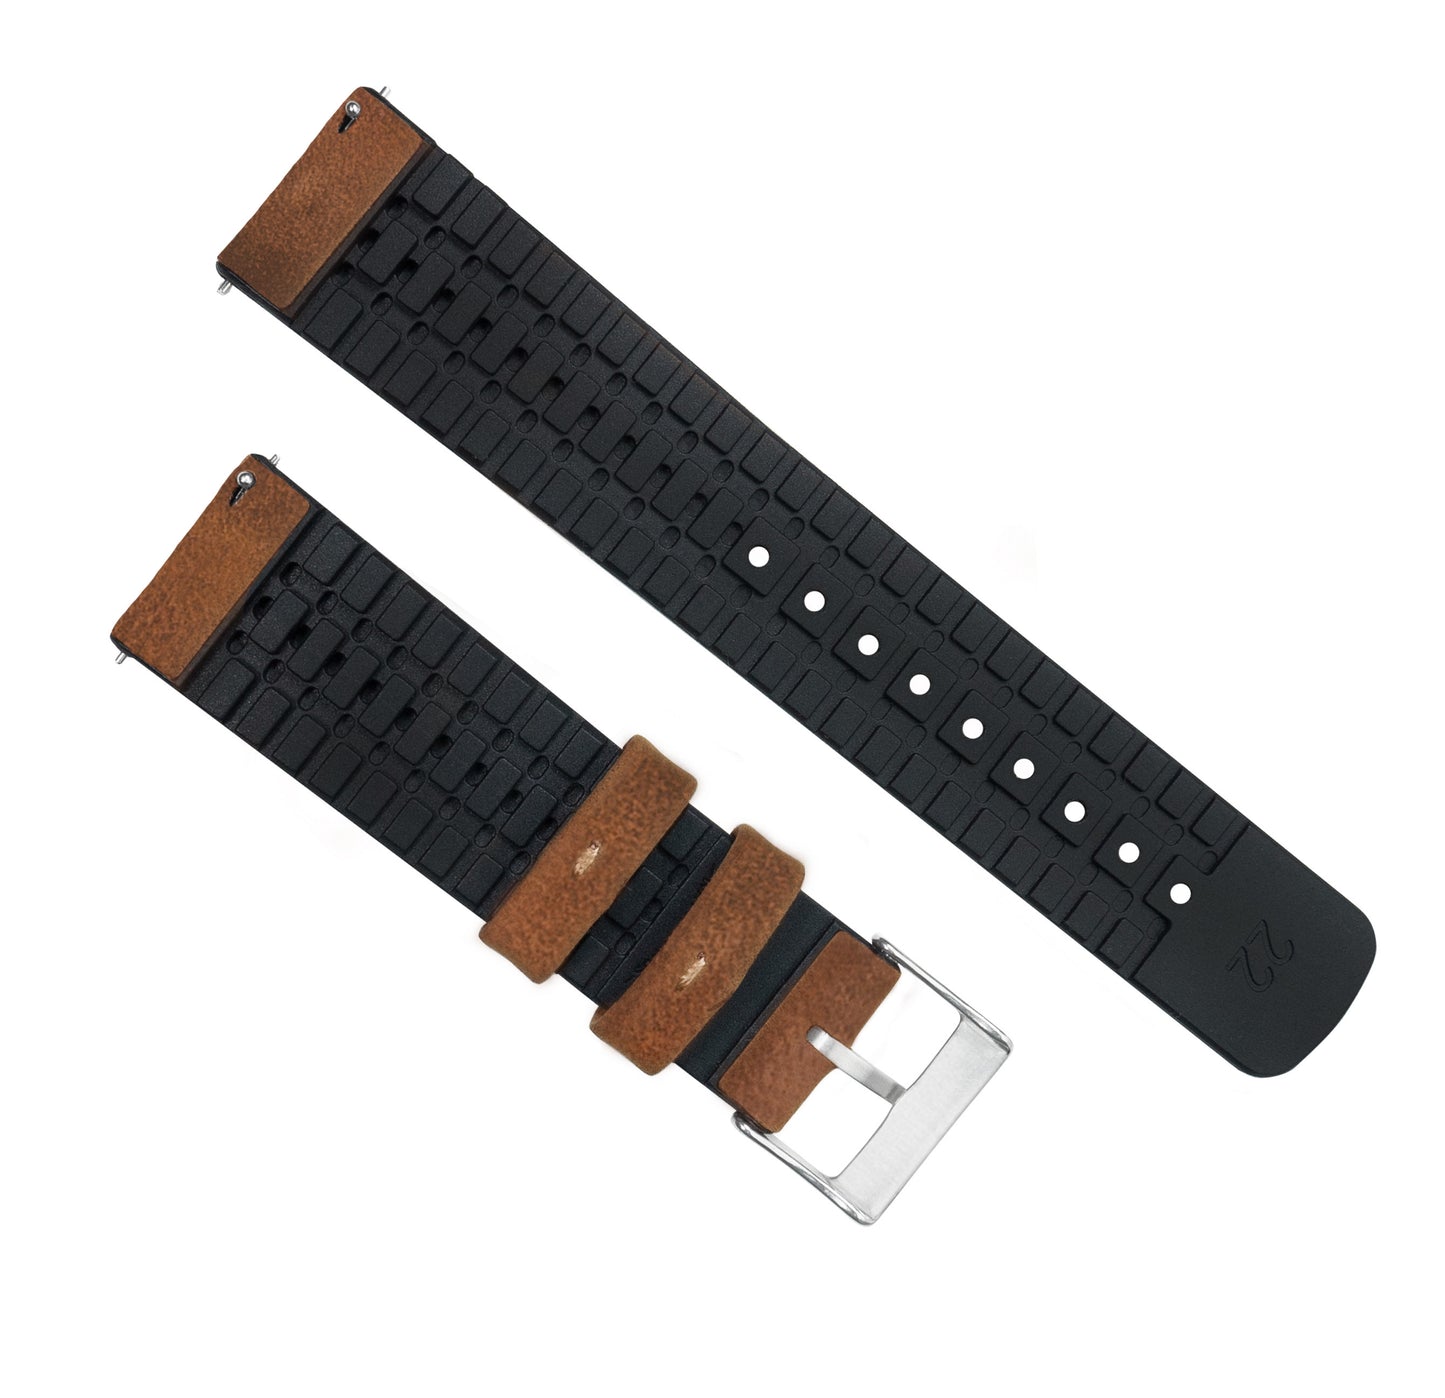 Oak Brown Leather And Rubber Hybrid Watch Band